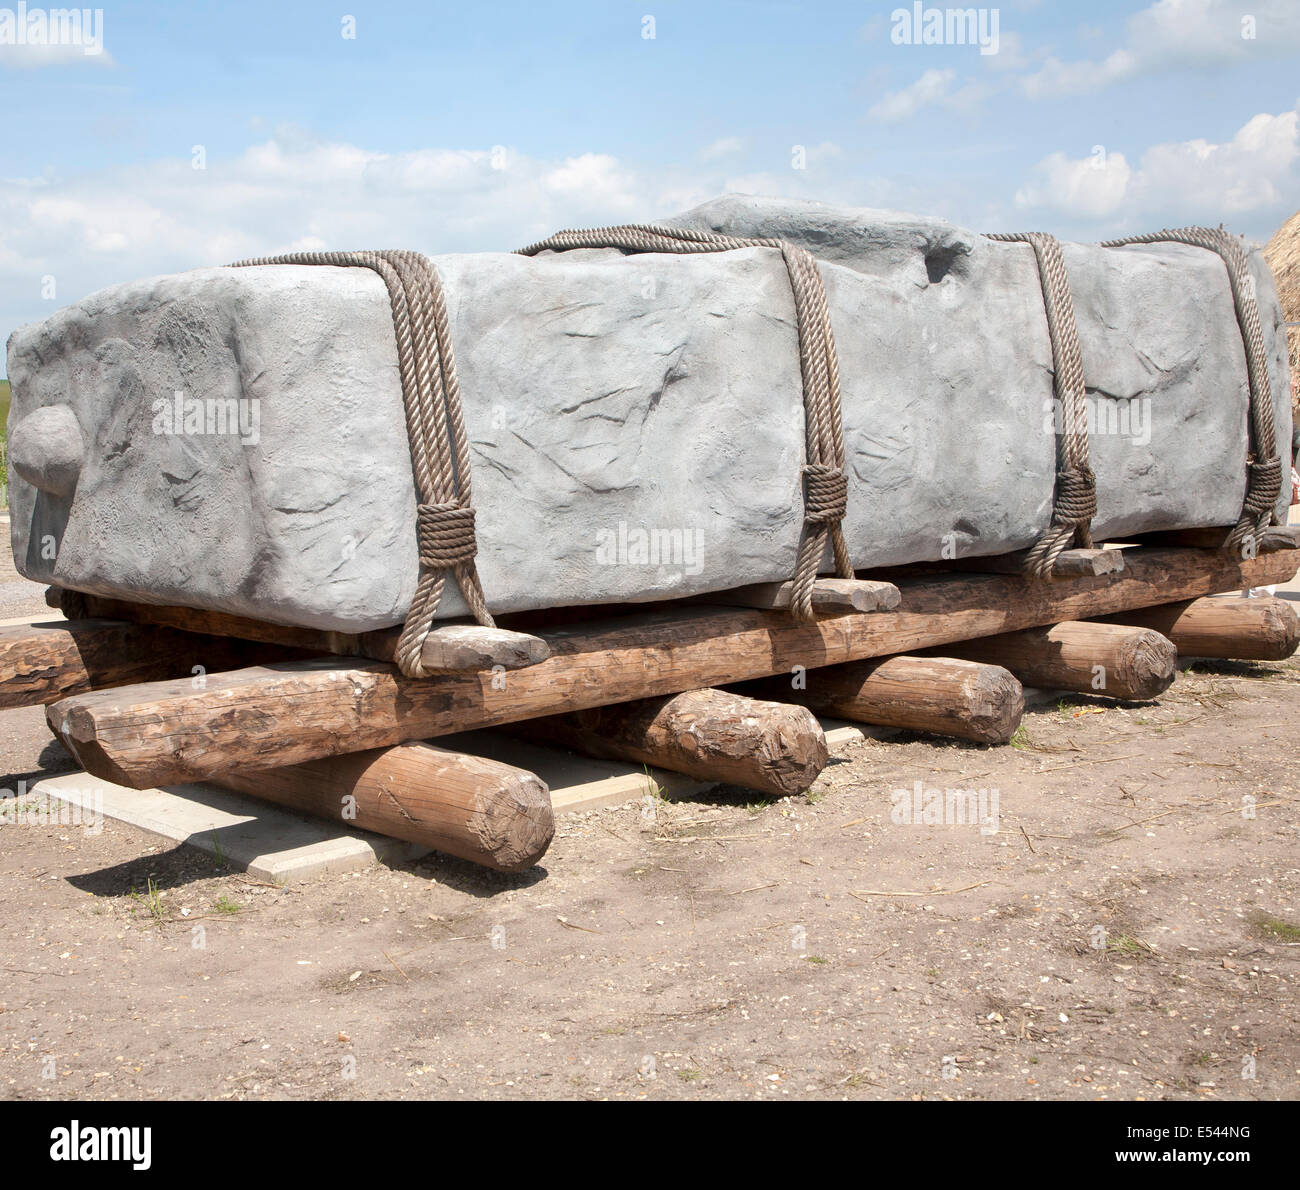 Replica of megalithic sledge transportation of large stones at the Stonehenge visitor attraction site, Wiltshire, England Stock Photo